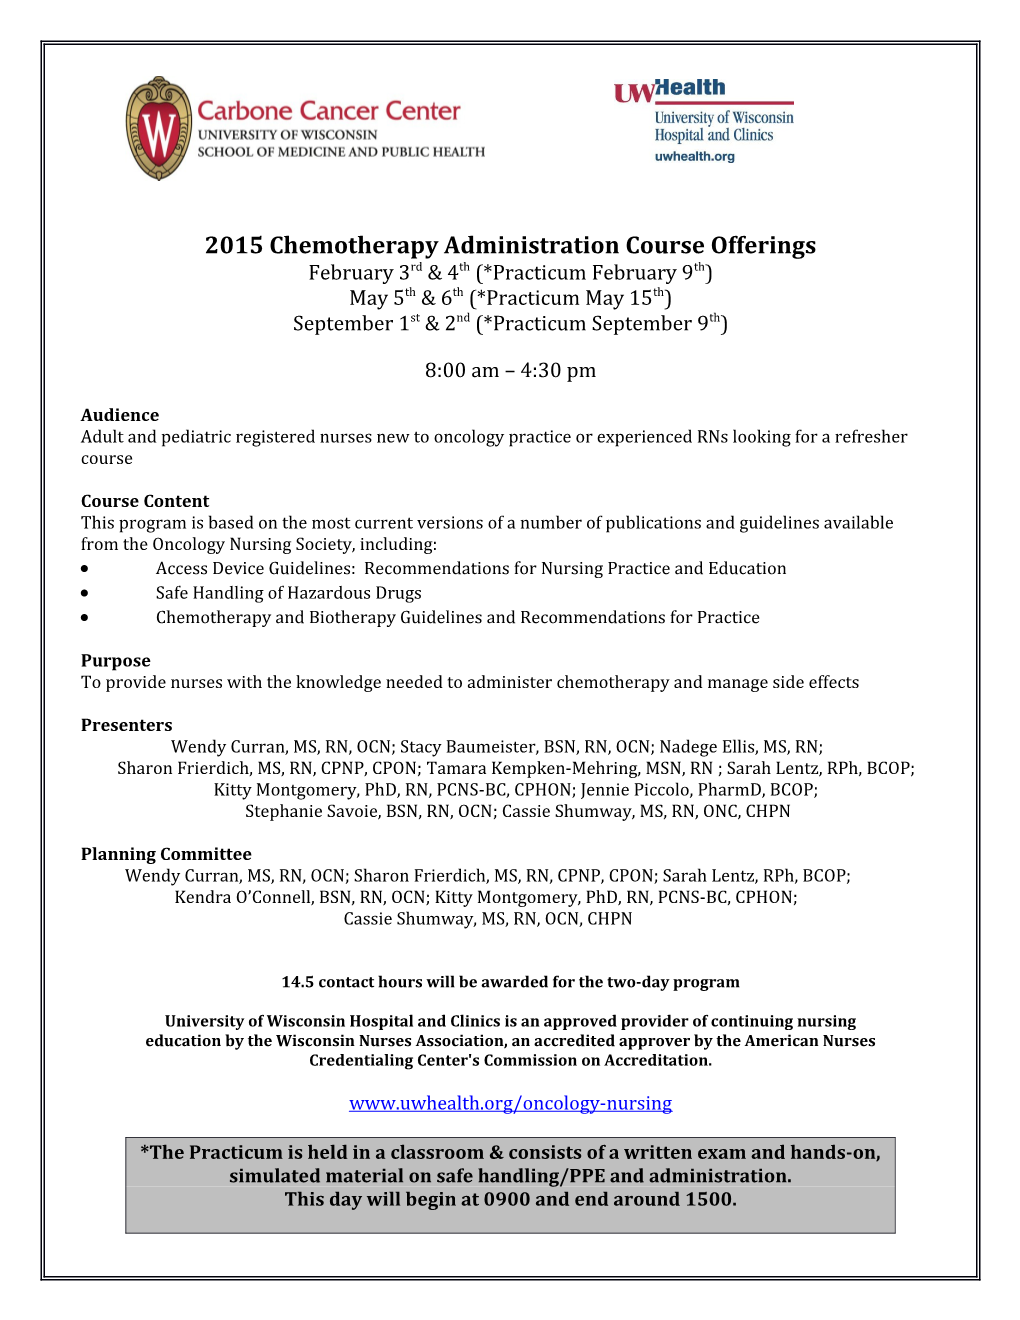 2015 Chemotherapy Administration Course Offerings